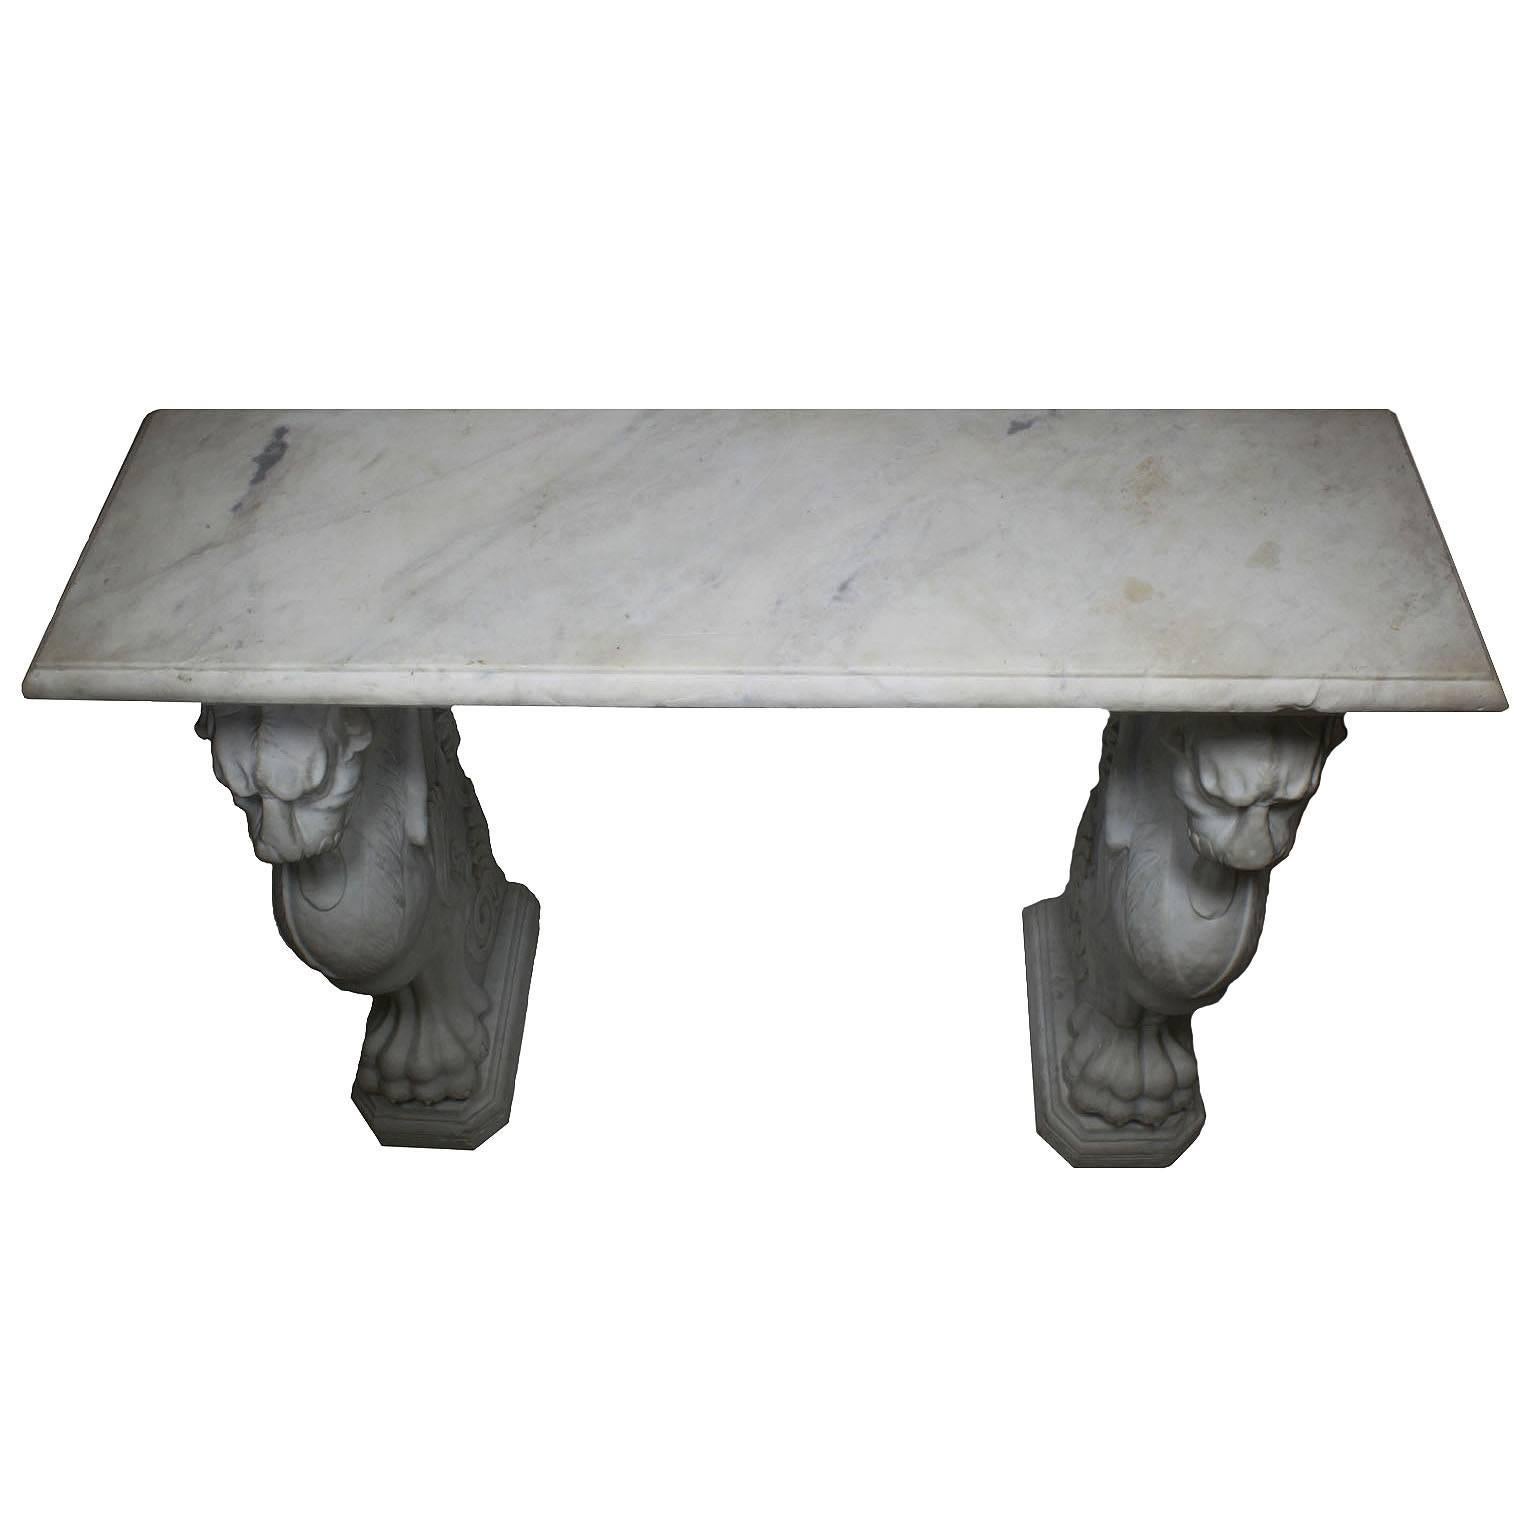 A Large Italian 19th century neoclassical Revival style carved Carrara marble figural wall console table. The rectangular marble top supported by twin Roman carved marble monopodiums of winged chimaera lions forepart on lion legs with paw feet. This